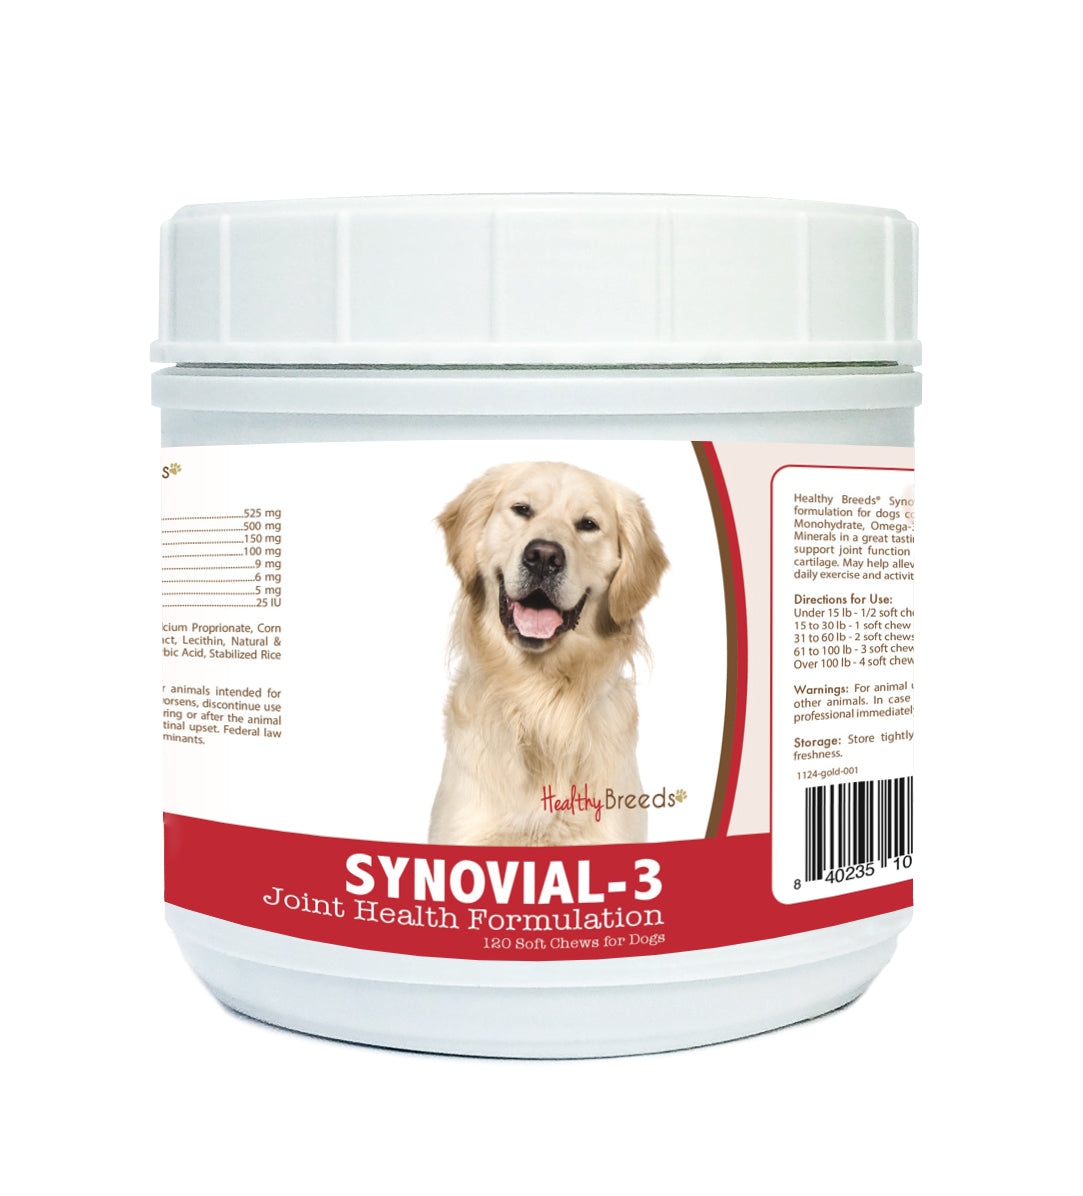 Golden Retriever Synovial-3 Joint Health Formulation Soft Chews 120 Count